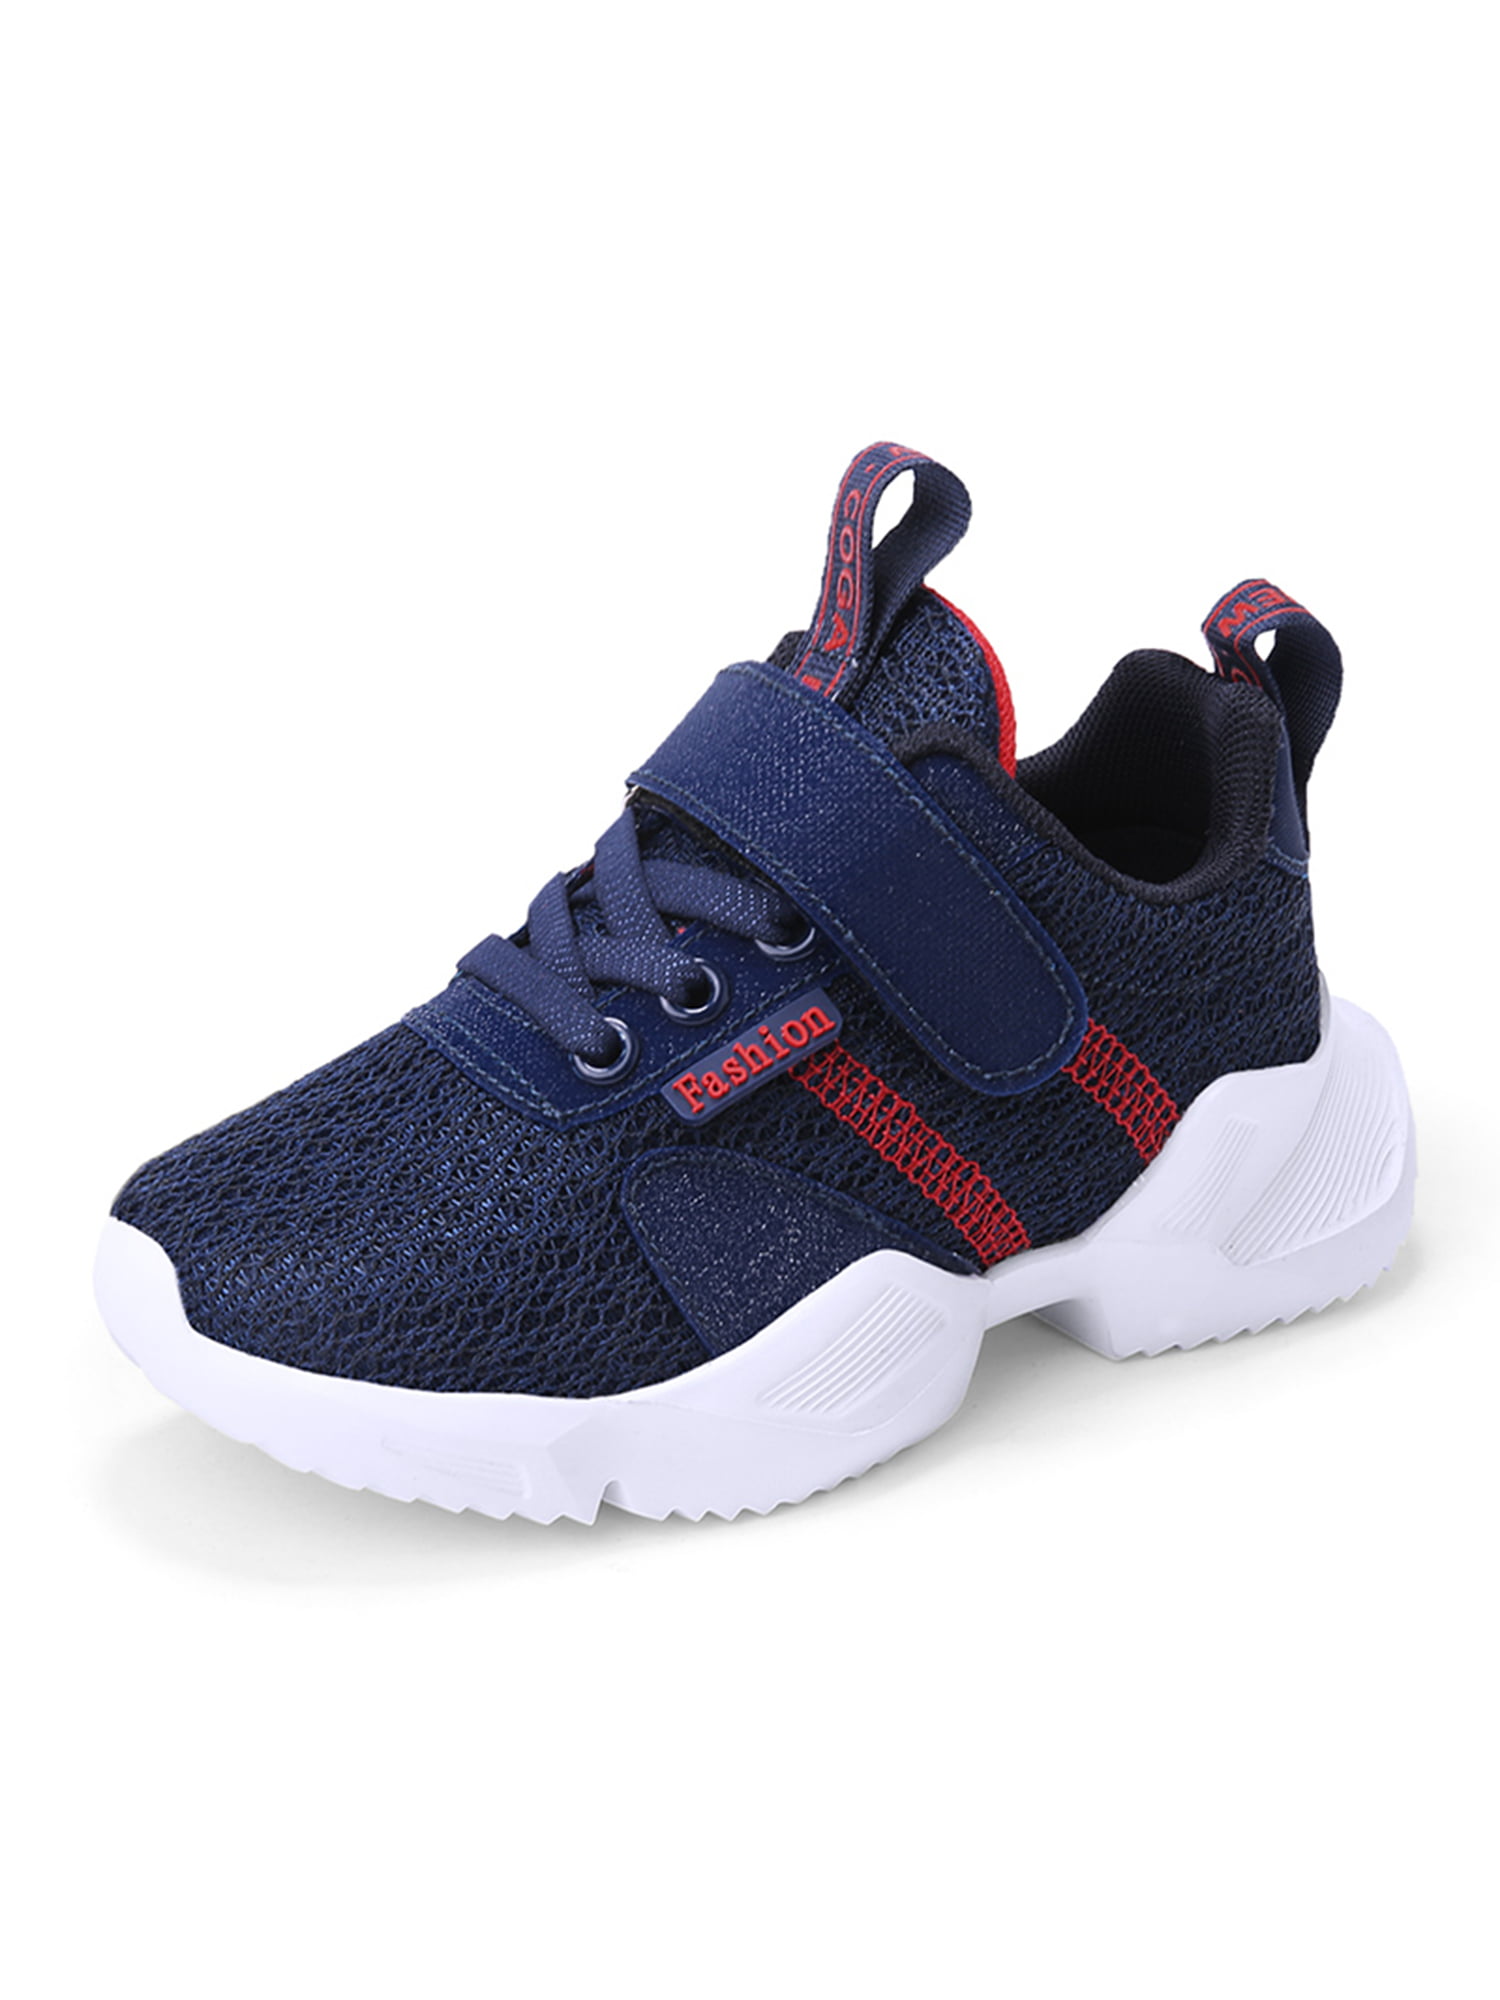 satisfied Childrens Mesh Shoes Breathable Casual Running Shoes Boys Sneaker